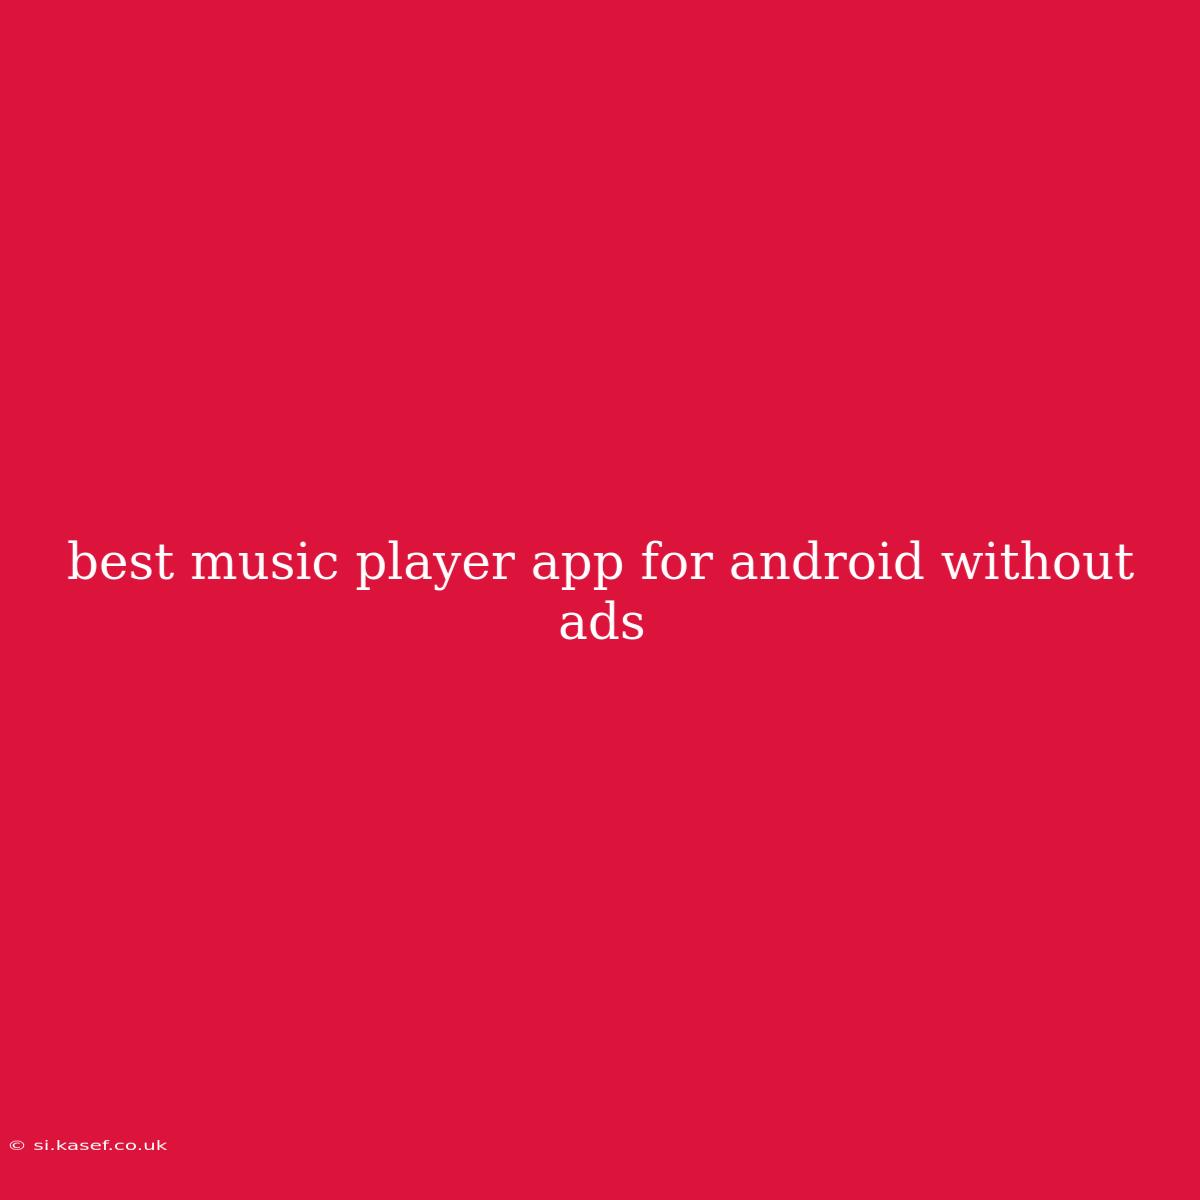 Best Music Player App For Android Without Ads